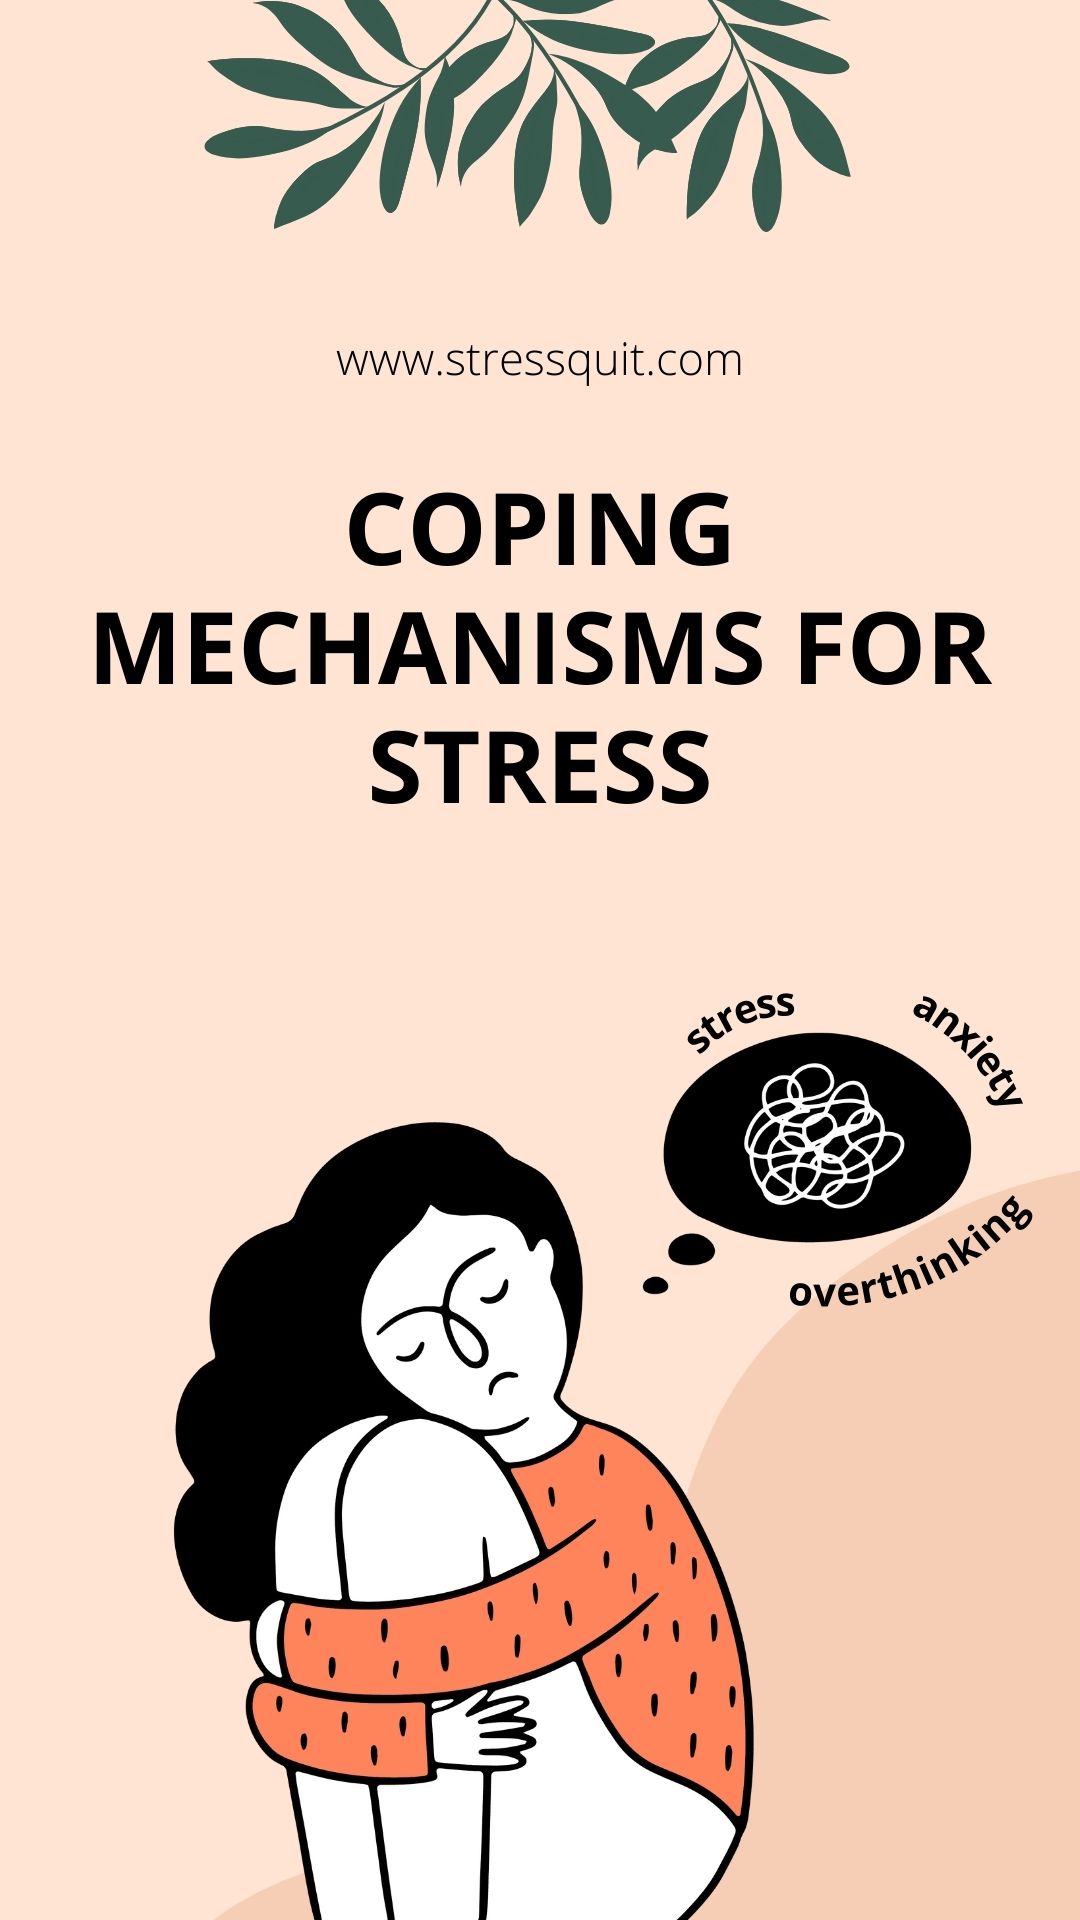 Is it really help Top 5 Coping Mechanisms for Stress and Depression in life?